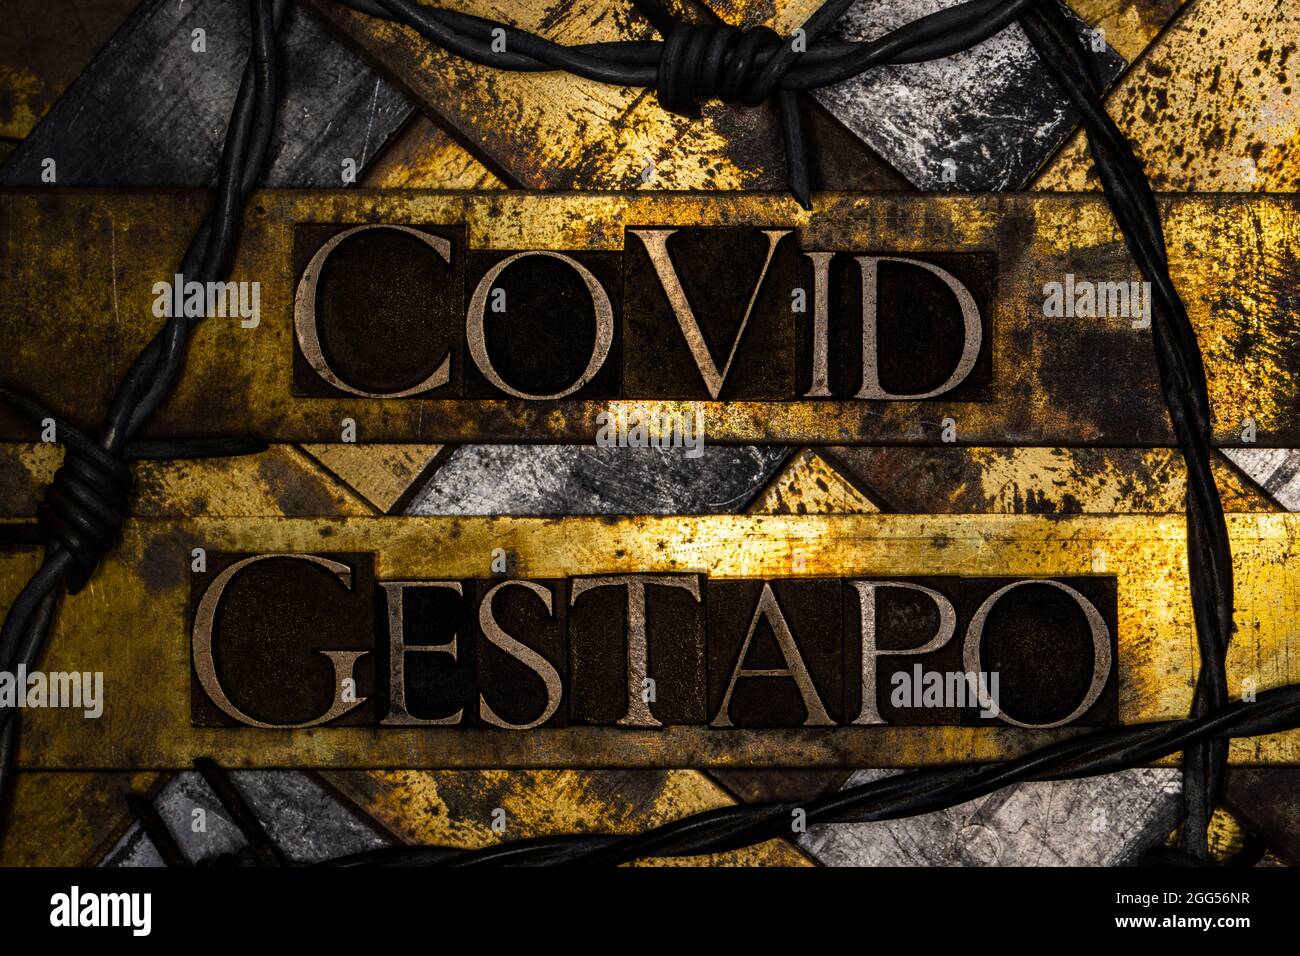 Covid Gestapo text on grunge copper and vintage gold background with barbed wire Stock Photo